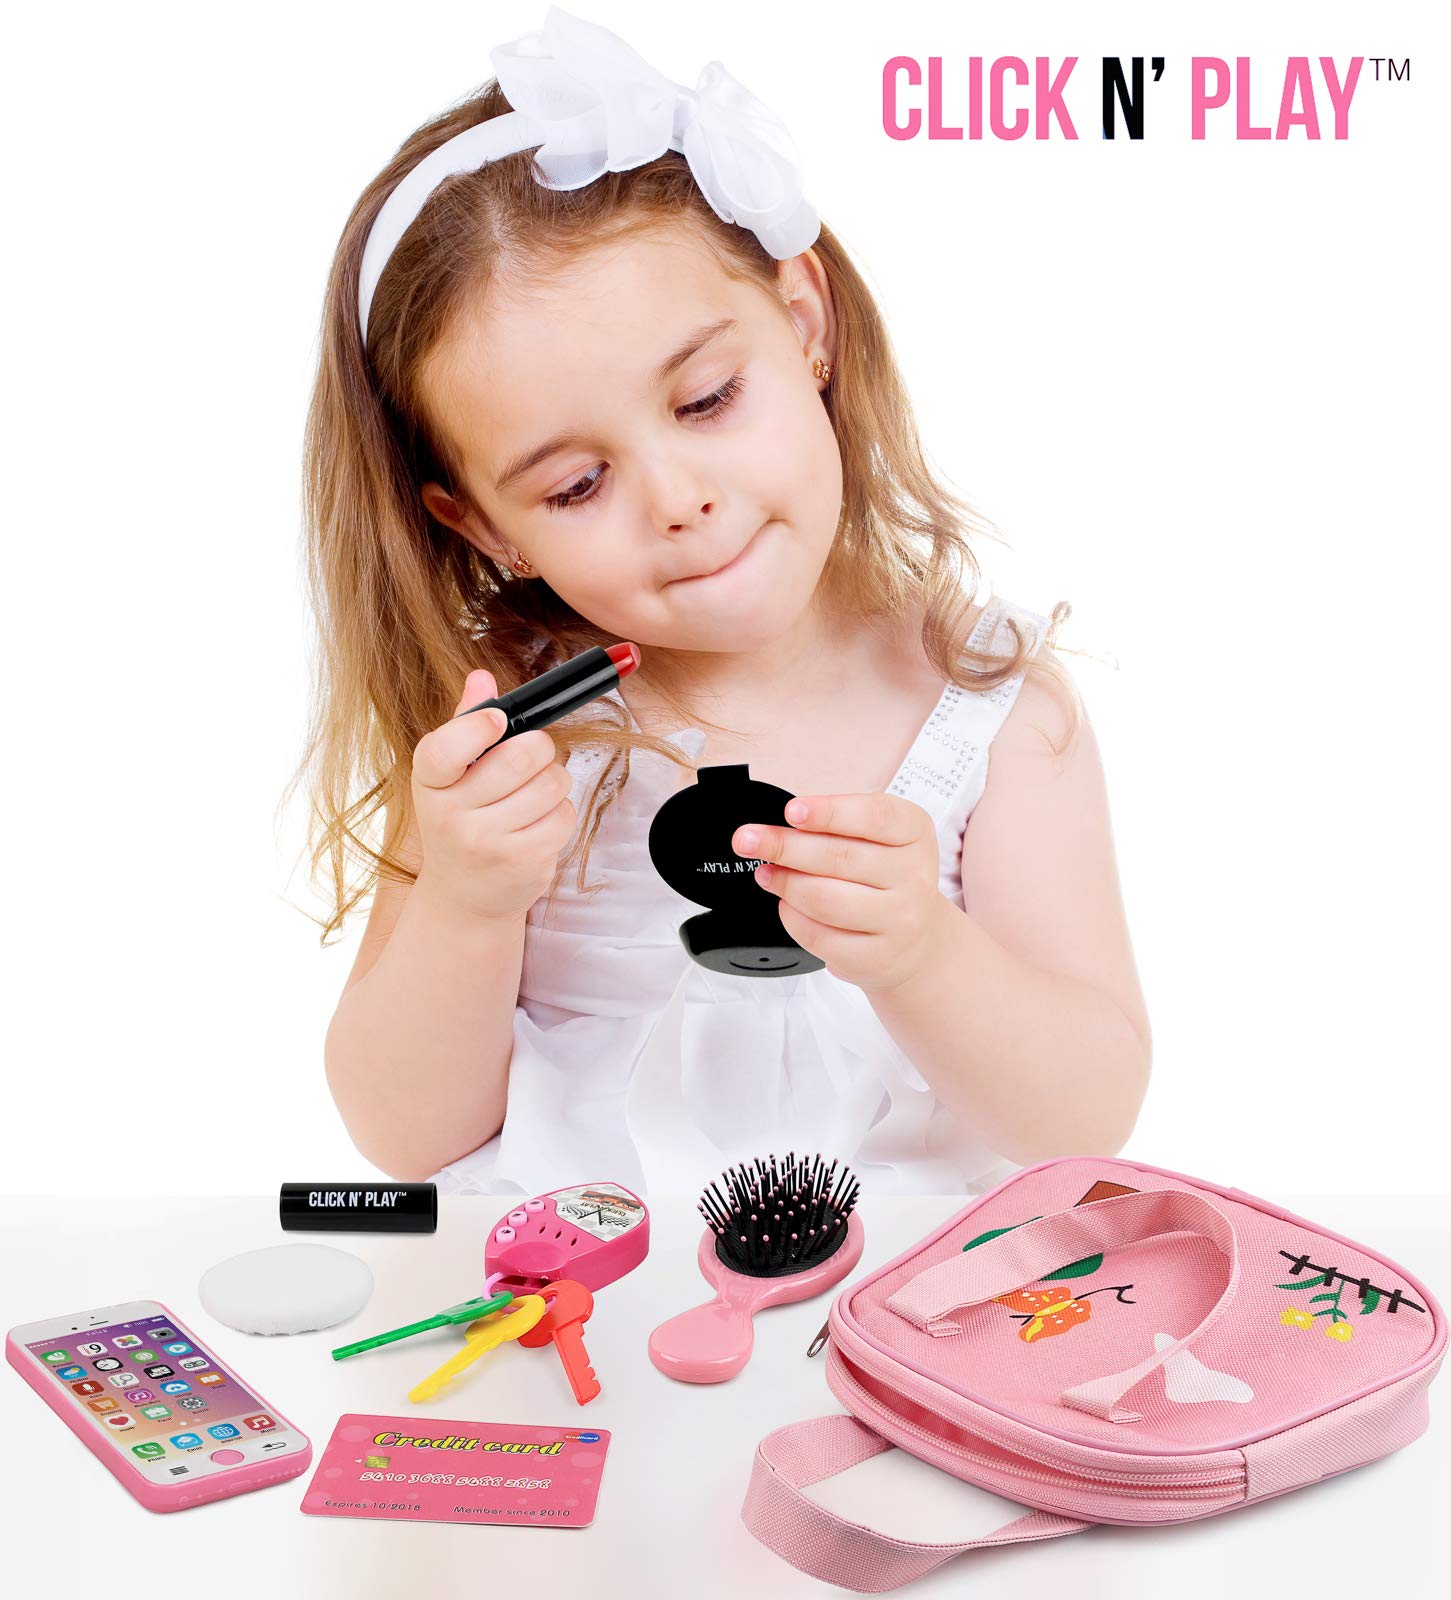 Little Girls Purse, Click N' Play Pretend Play Purse Set, Handbag with 8 Pieces including Makeup, Smartphone, Wallet, Keys, Credit Card, Toy Purse for Toddler Girls Ages 2+